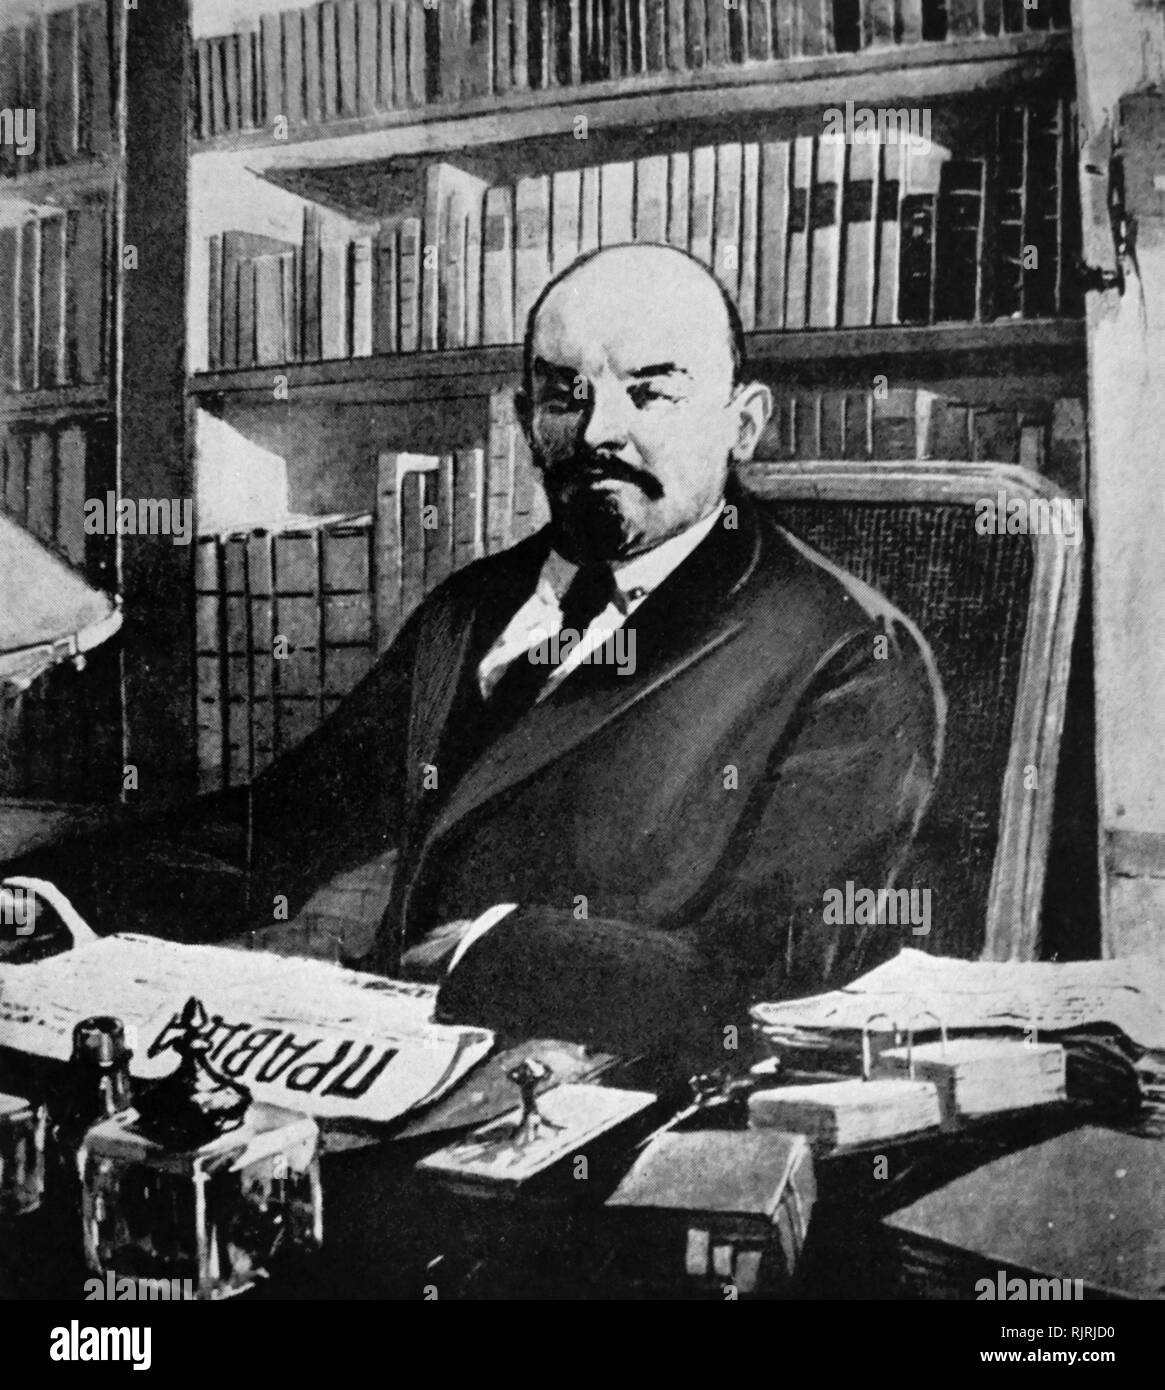 Vladimir Ilyich Ulyanov, known by the alias Lenin (1870 - 1924), Russian communist revolutionary, politician and political theorist. He served as head of government of Soviet Russia from 1917 to 1924 and of the Soviet Union from 1922 to 1924. Under his administration, Russia and then the wider Soviet Union became a one-party communist state governed by the Russian Communist Party. Ideologically a Marxist, he developed political theories known as Leninism. Stock Photo